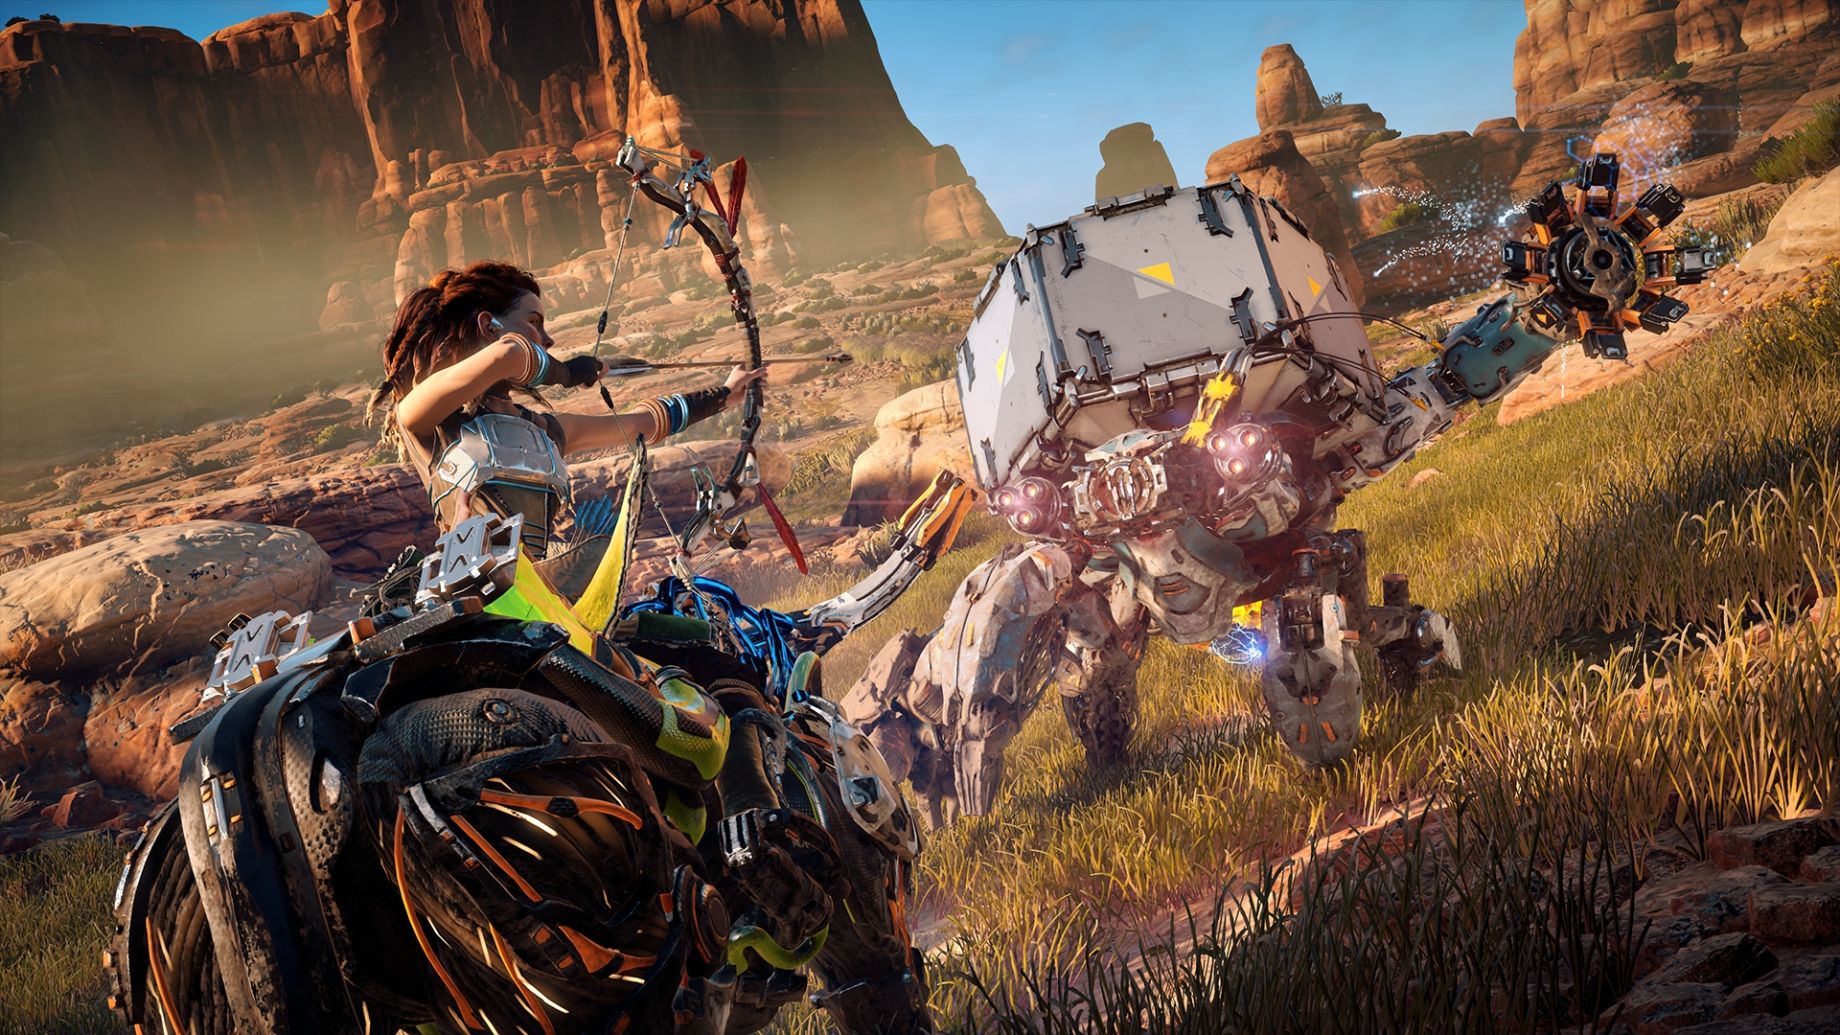 Horizon Forbidden West: Complete Edition Is Reportedly the First